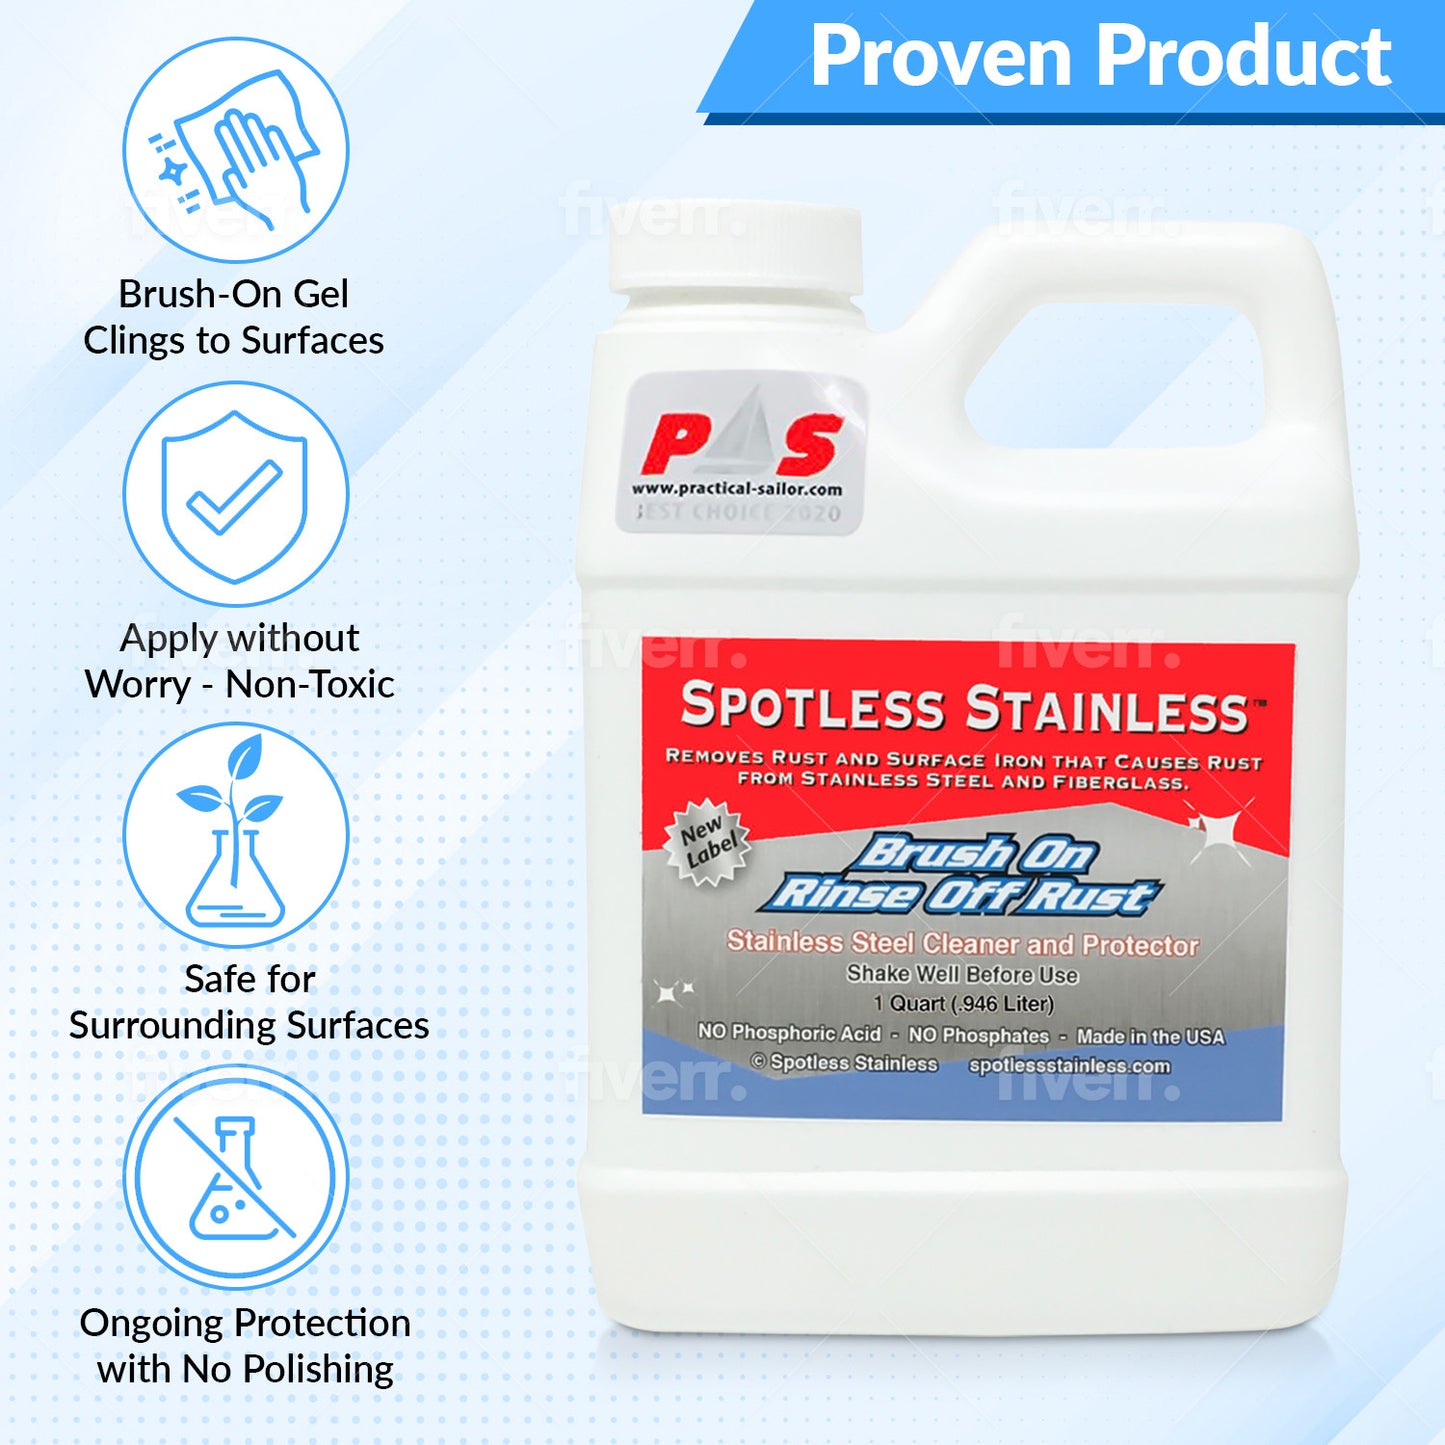 Spotless Stainless Rust Remover and Protectant - 1 Gallon